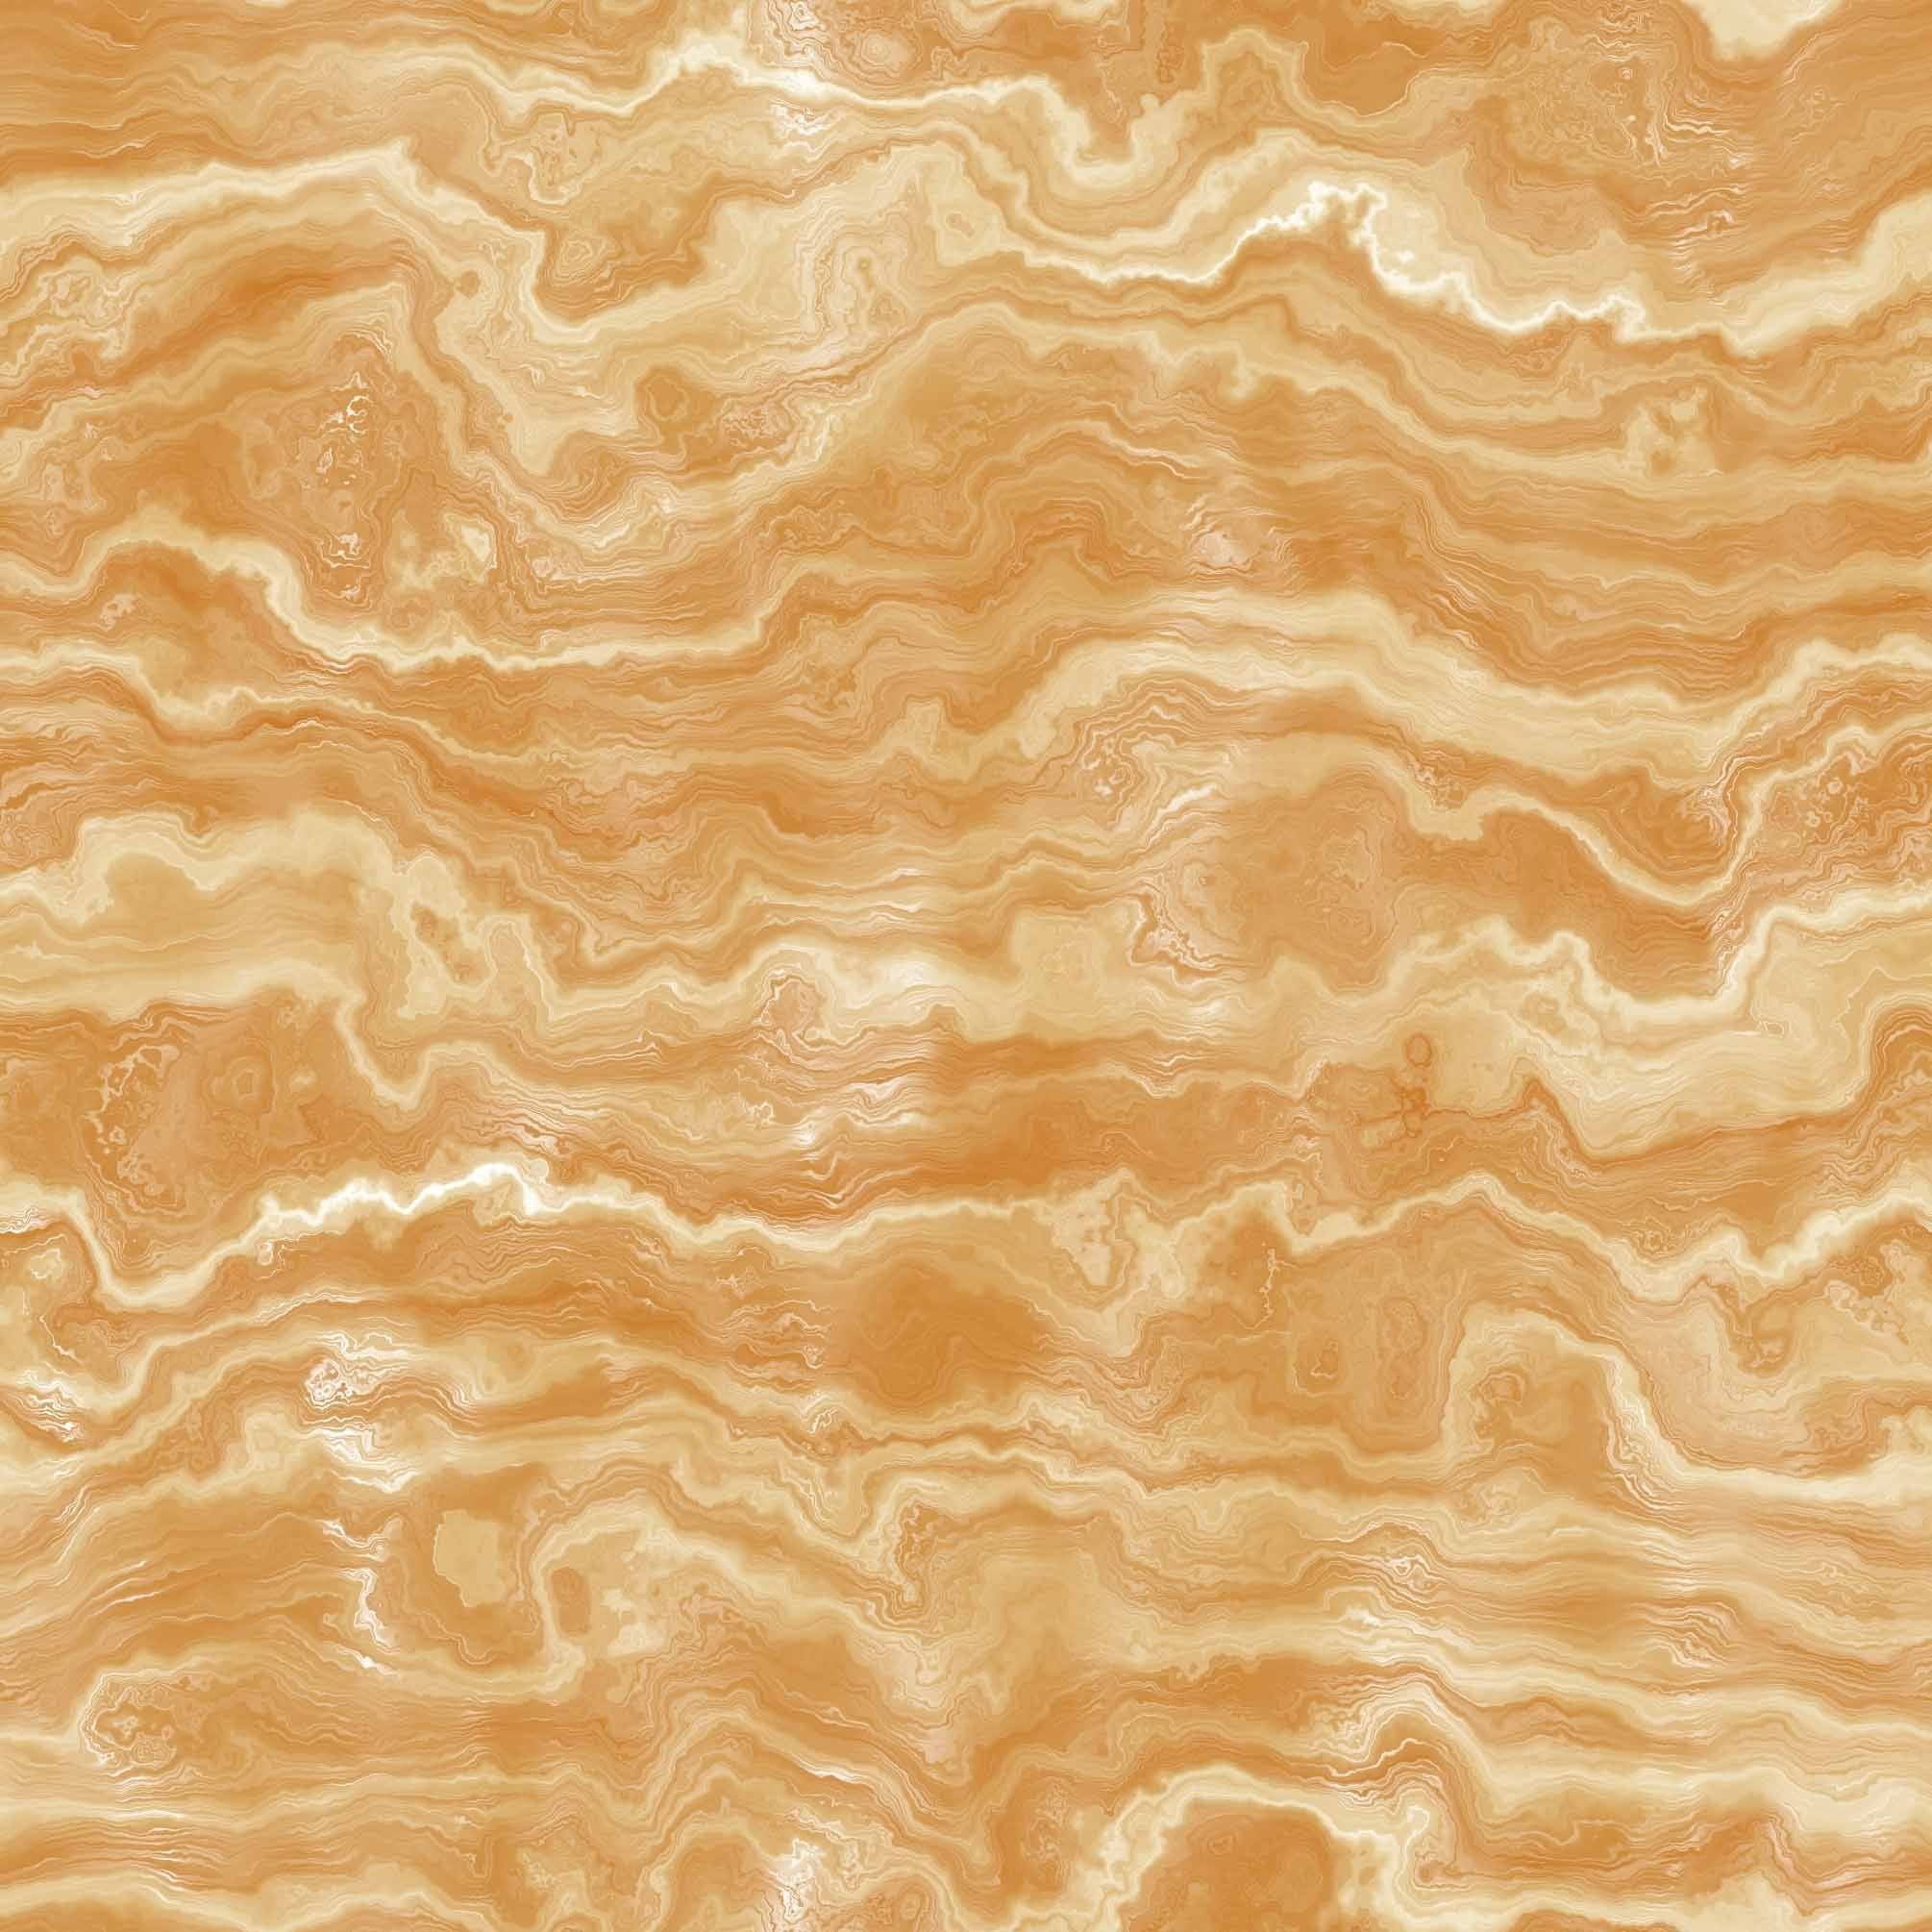 Chrome Yellow Marble With Natural Texture Photography Backdrop Shopbackdrop